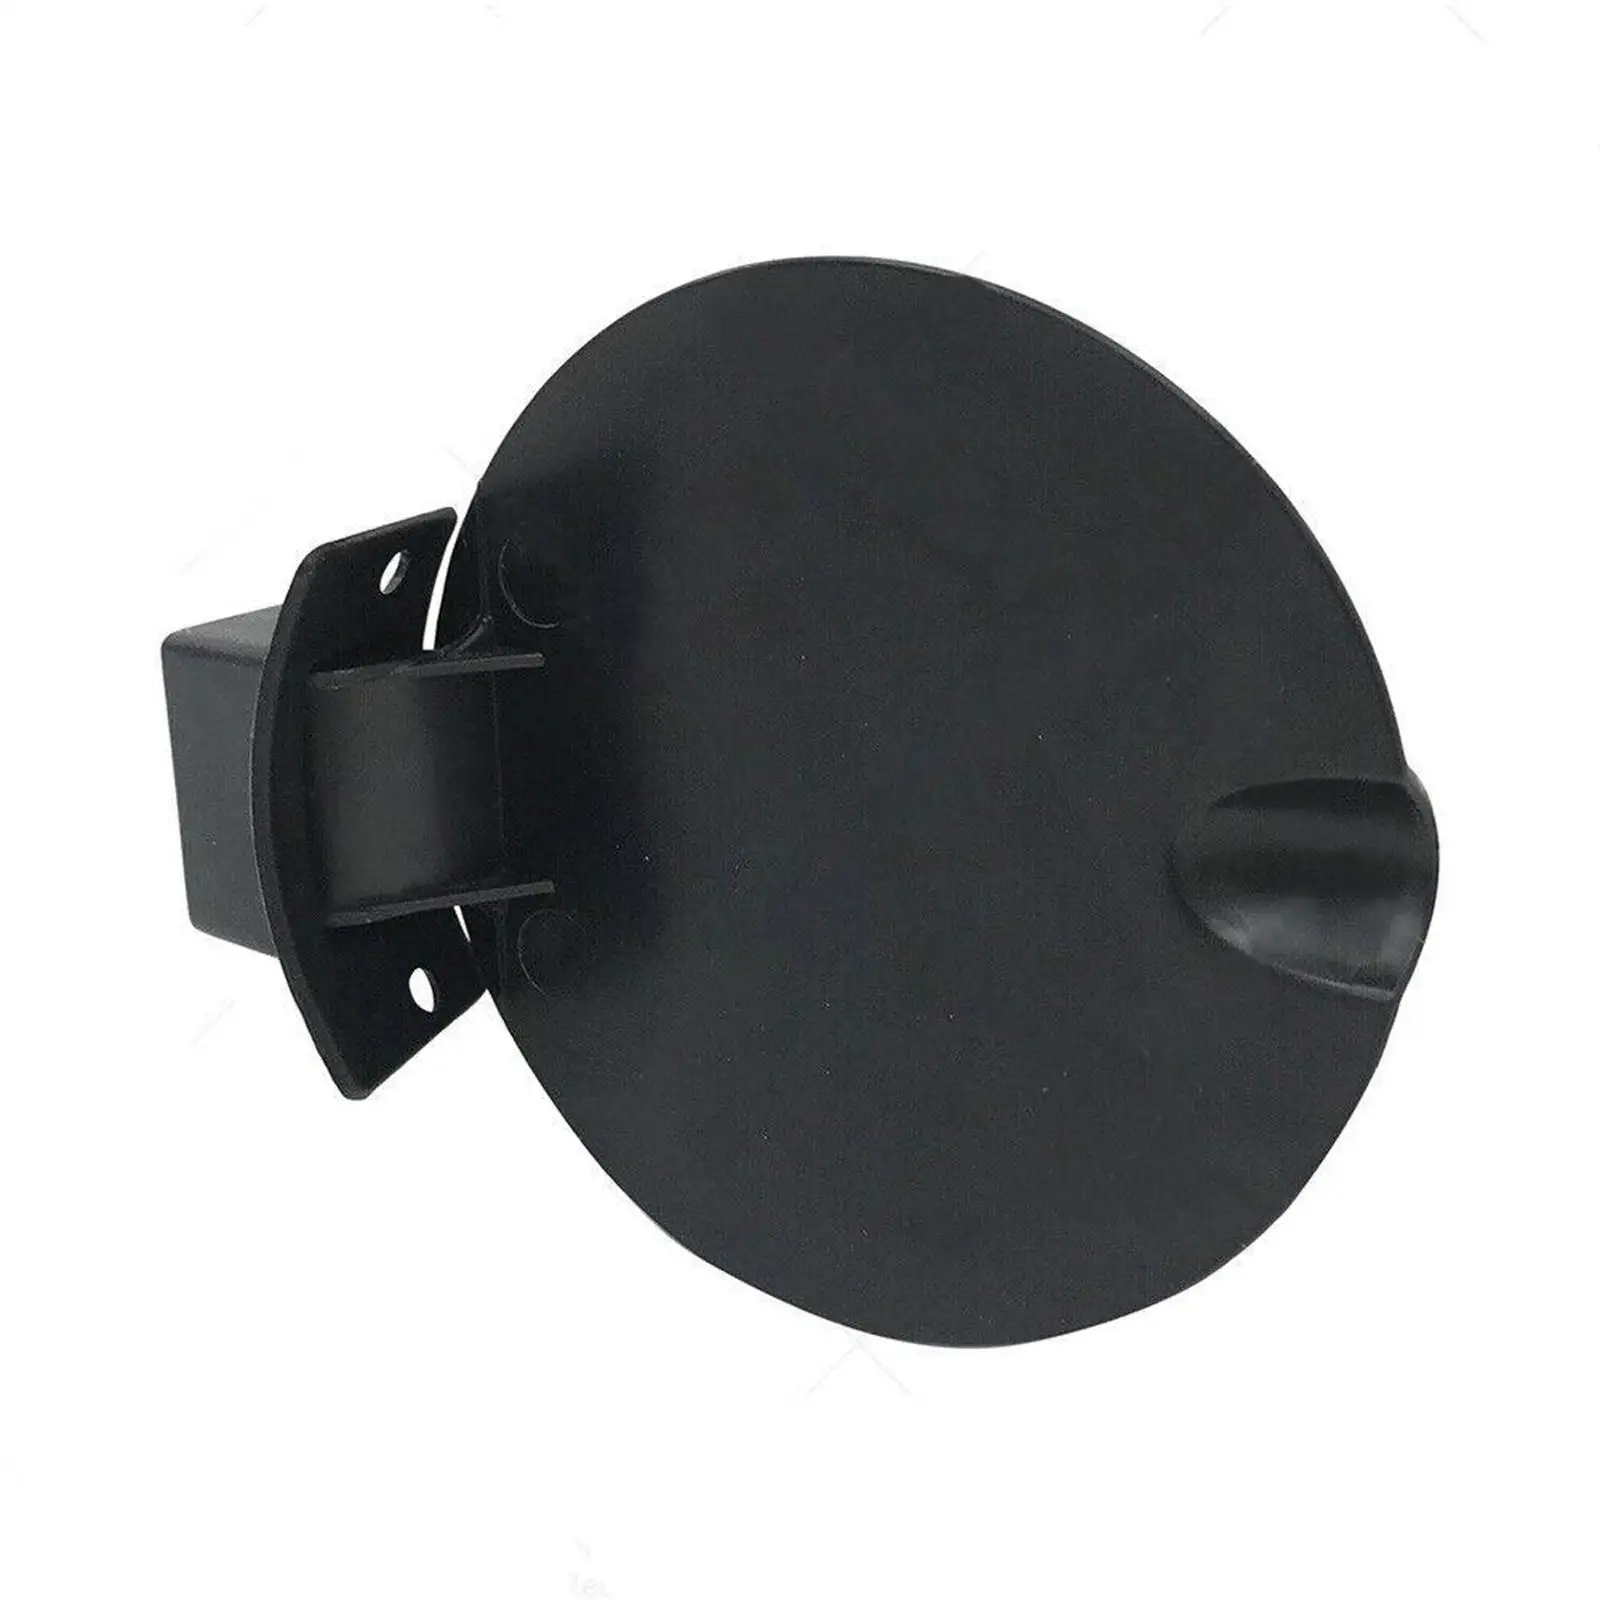 Fuel Flap Fuel Tank Cap Modification for Holden 2000 to 2007 Commodore